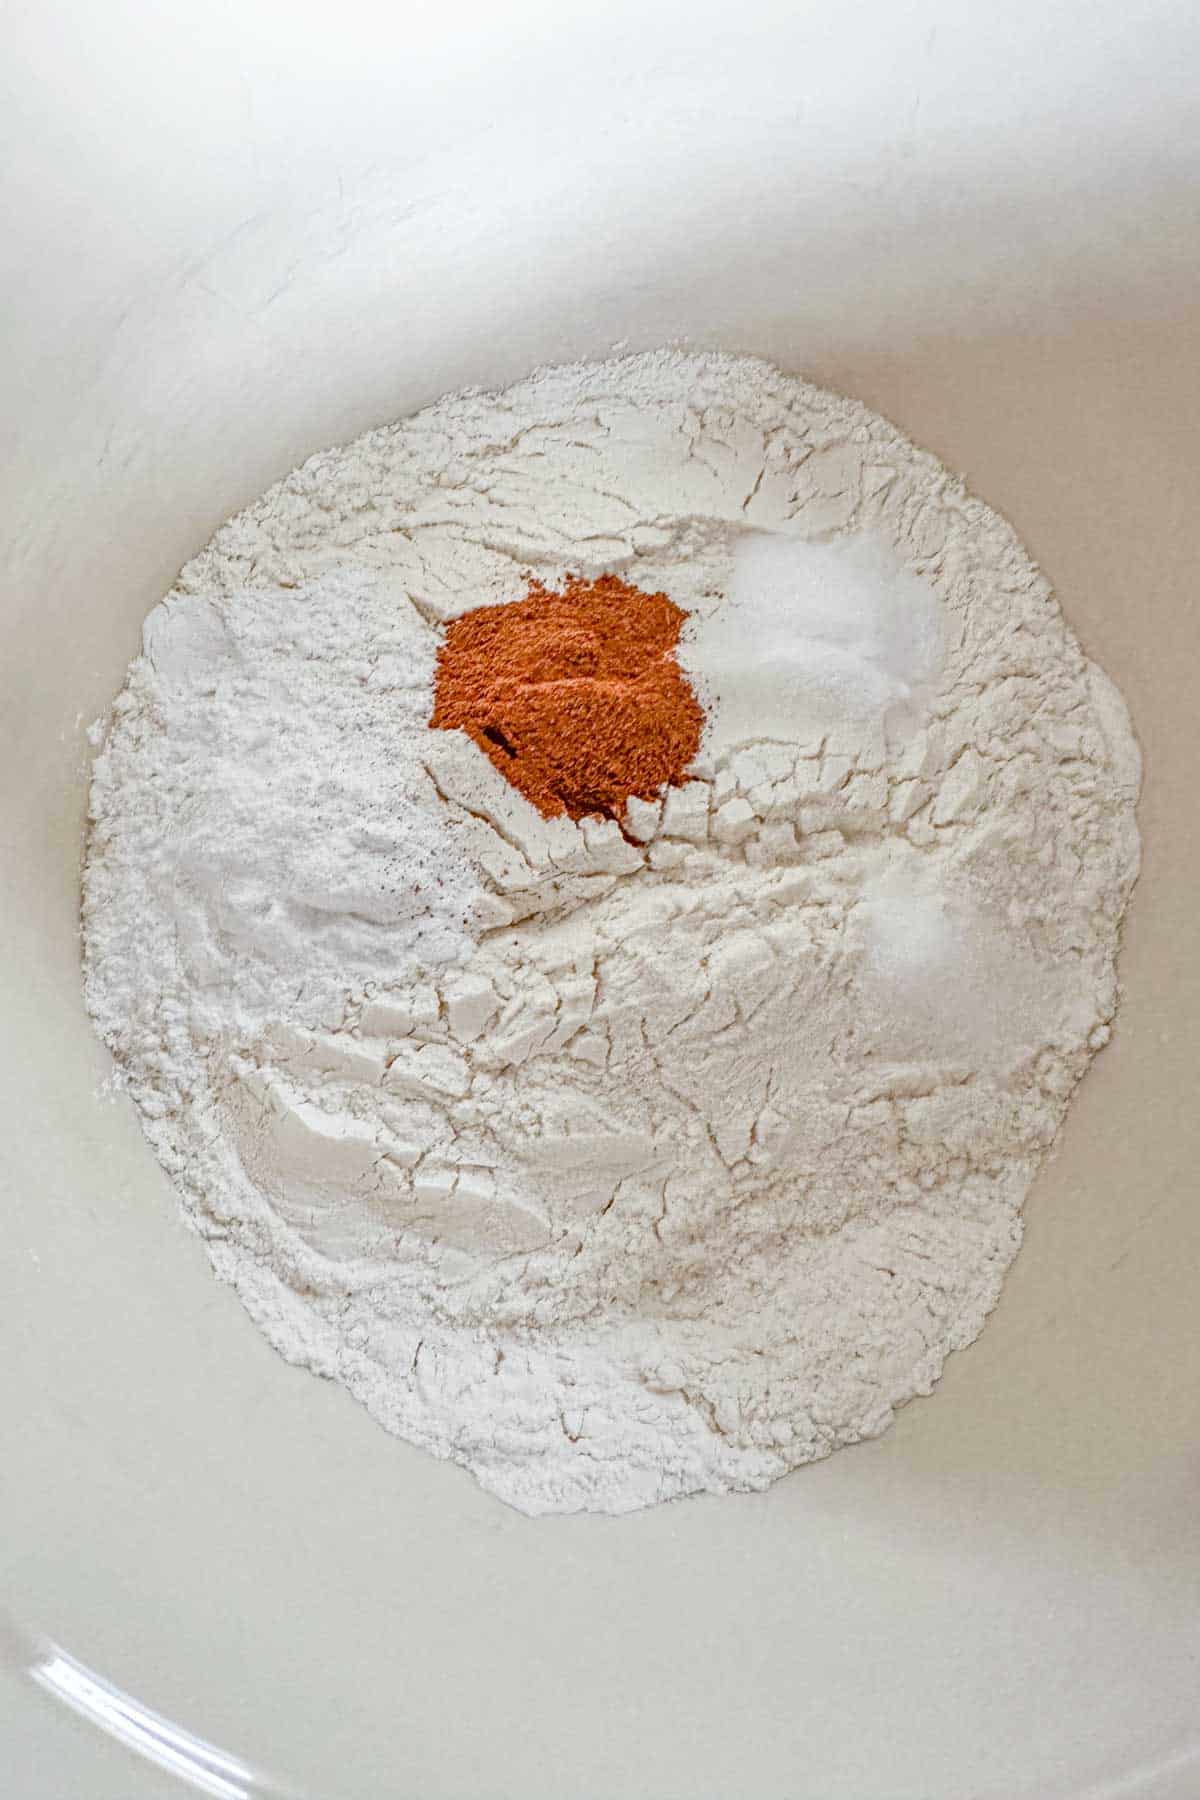 Dry ingredients for pecan pancakes in a mixing bowl.